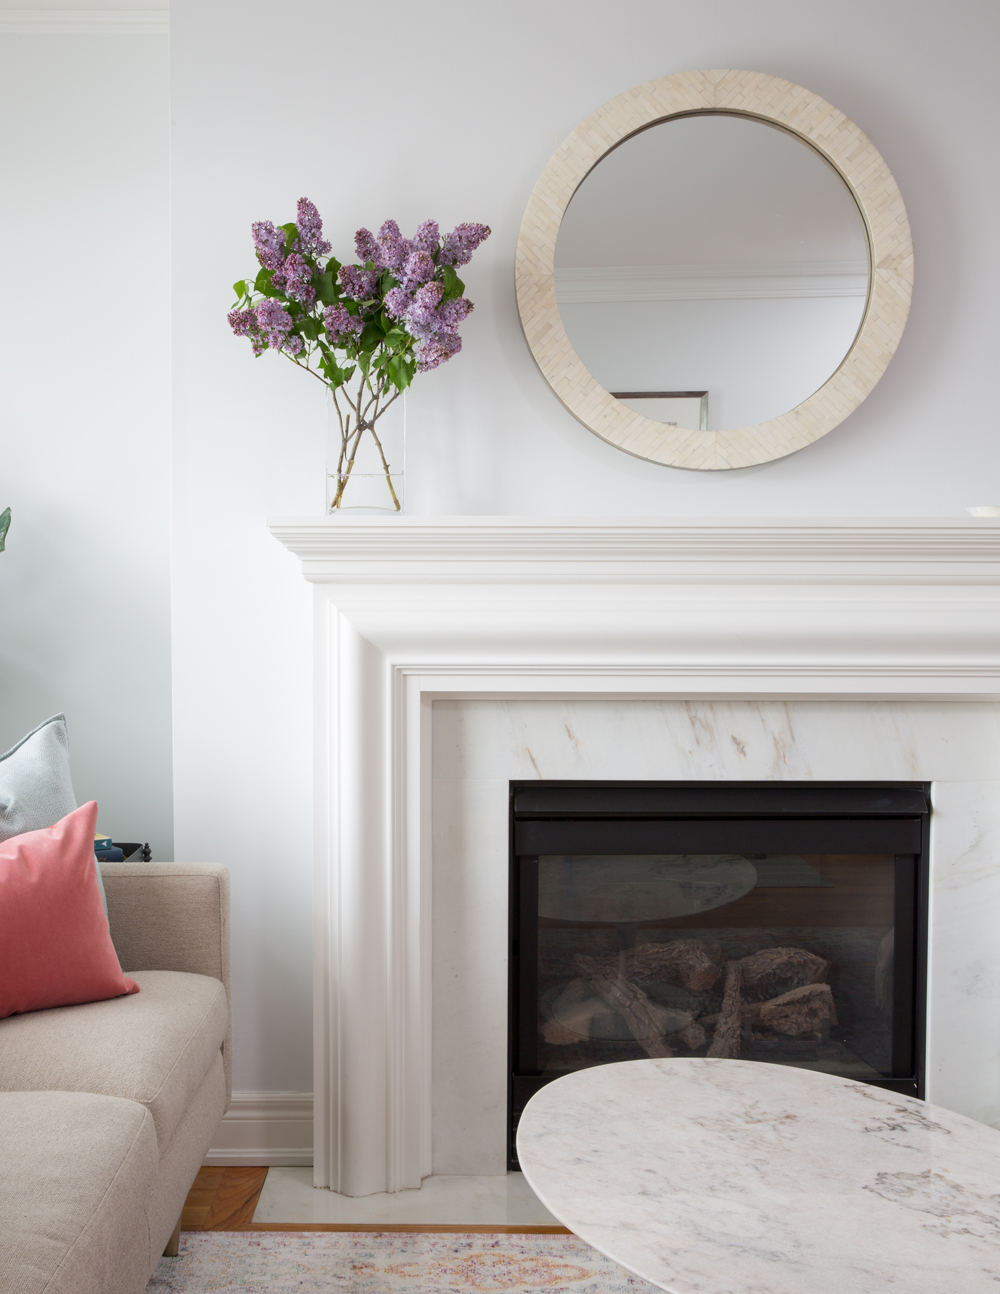 round mirror and lilacs over fireplace